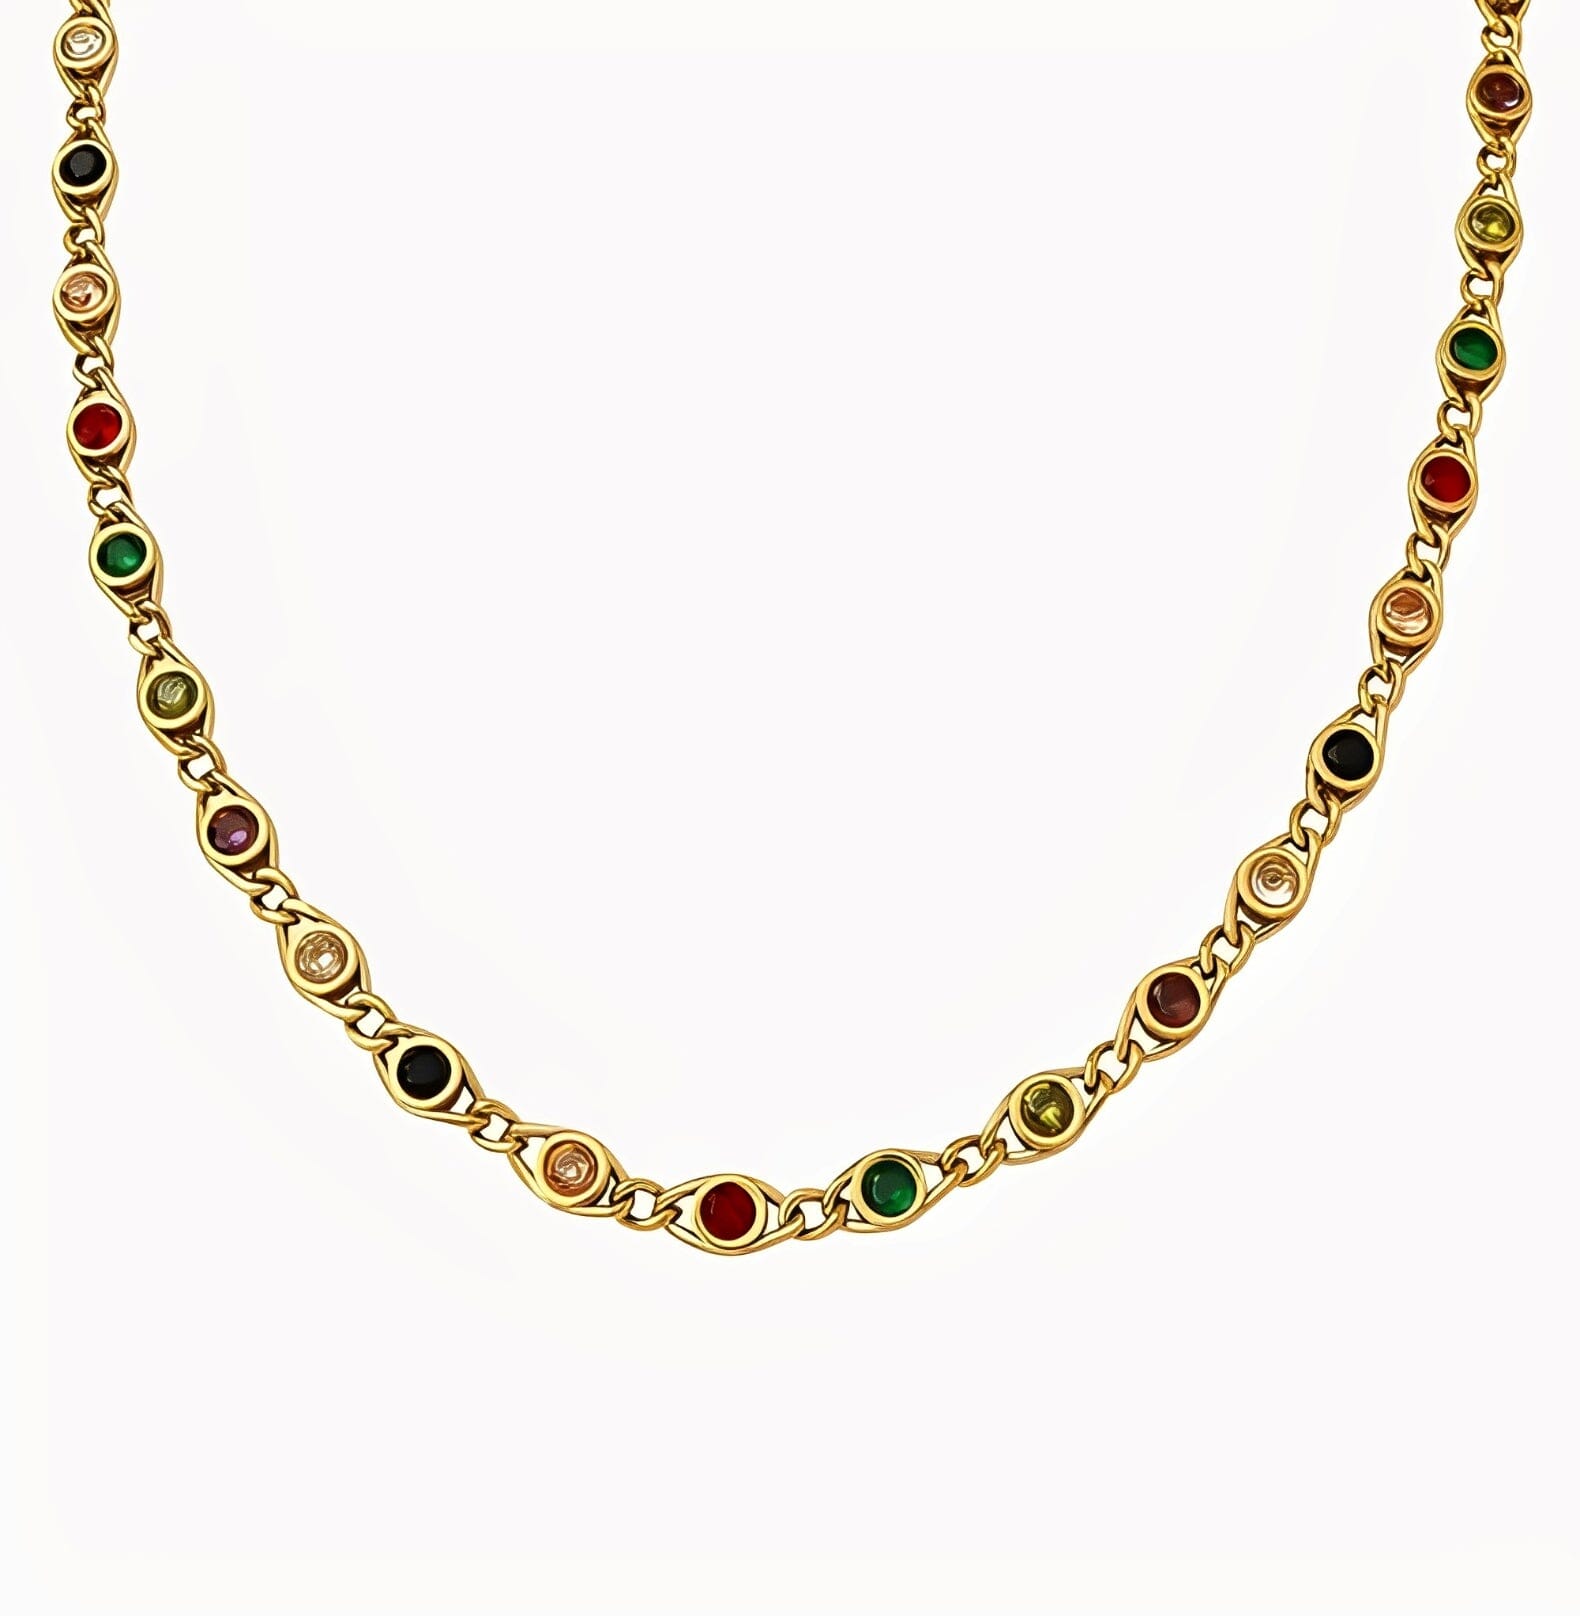 GEM STONE NECKLACE neck Yubama Jewelry Online Store - The Elegant Designs of Gold and Silver ! Necklace 